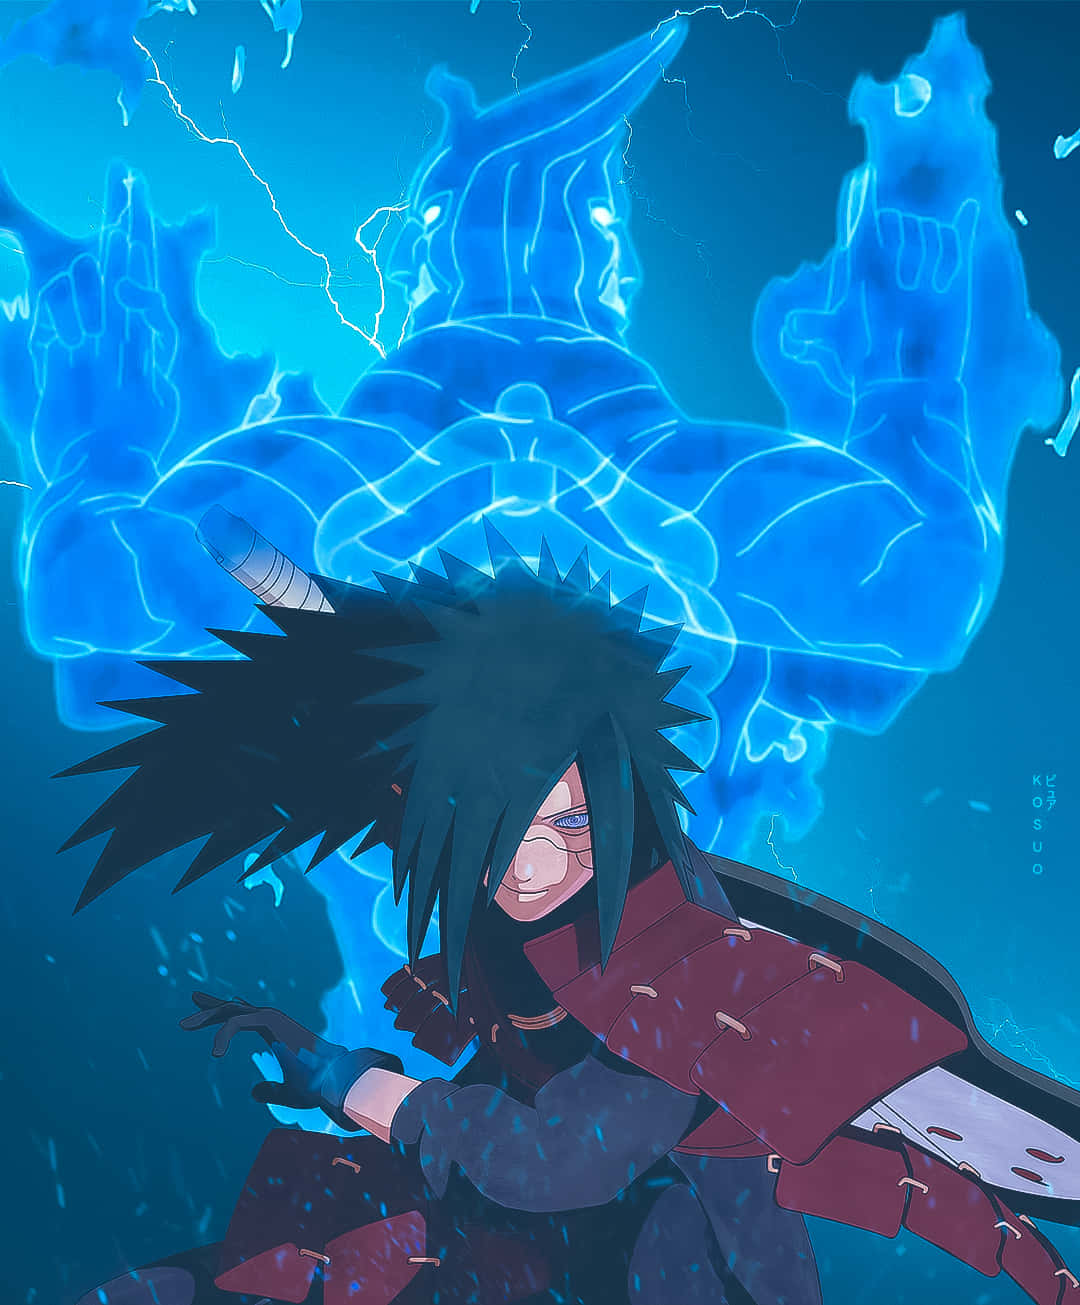 Madara Uchiha, a powerful antagonist in the hit anime series Naruto